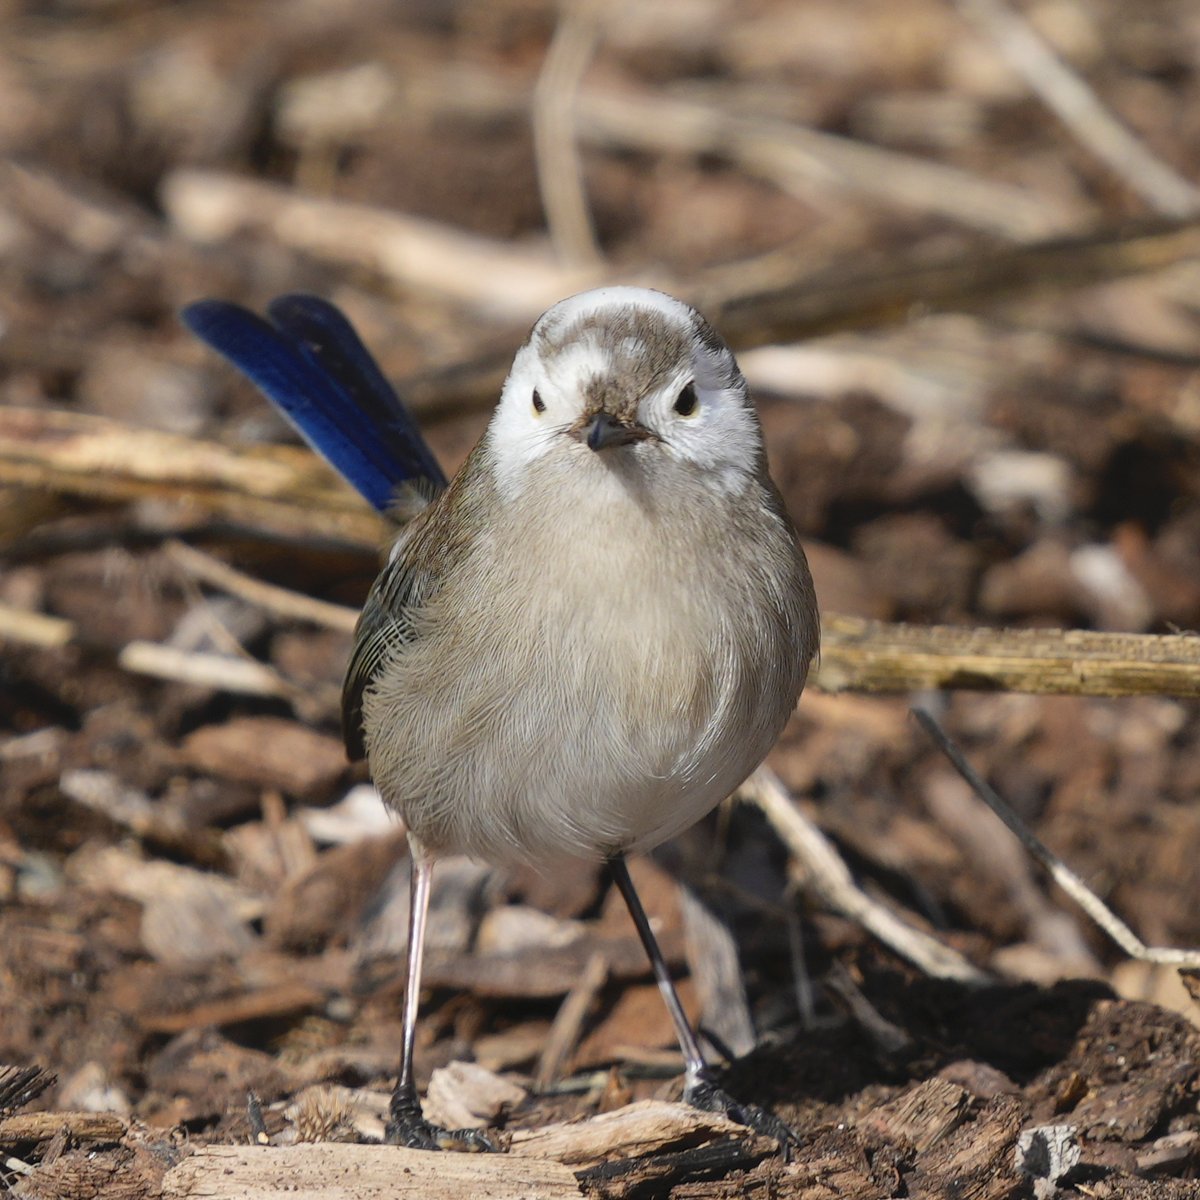 Happy #WrensDay from this white-headed #SuperbFairyWren ....

An unsually coloured individual at #GreenfieldsWetlands

#wildoz #Ozbirds #birdwatching #BirdPhotography #AustralianBirds #wildlifephotography #Wren #FairyWren #BirdsOfTwitter #AustralianWildlife #ornithology